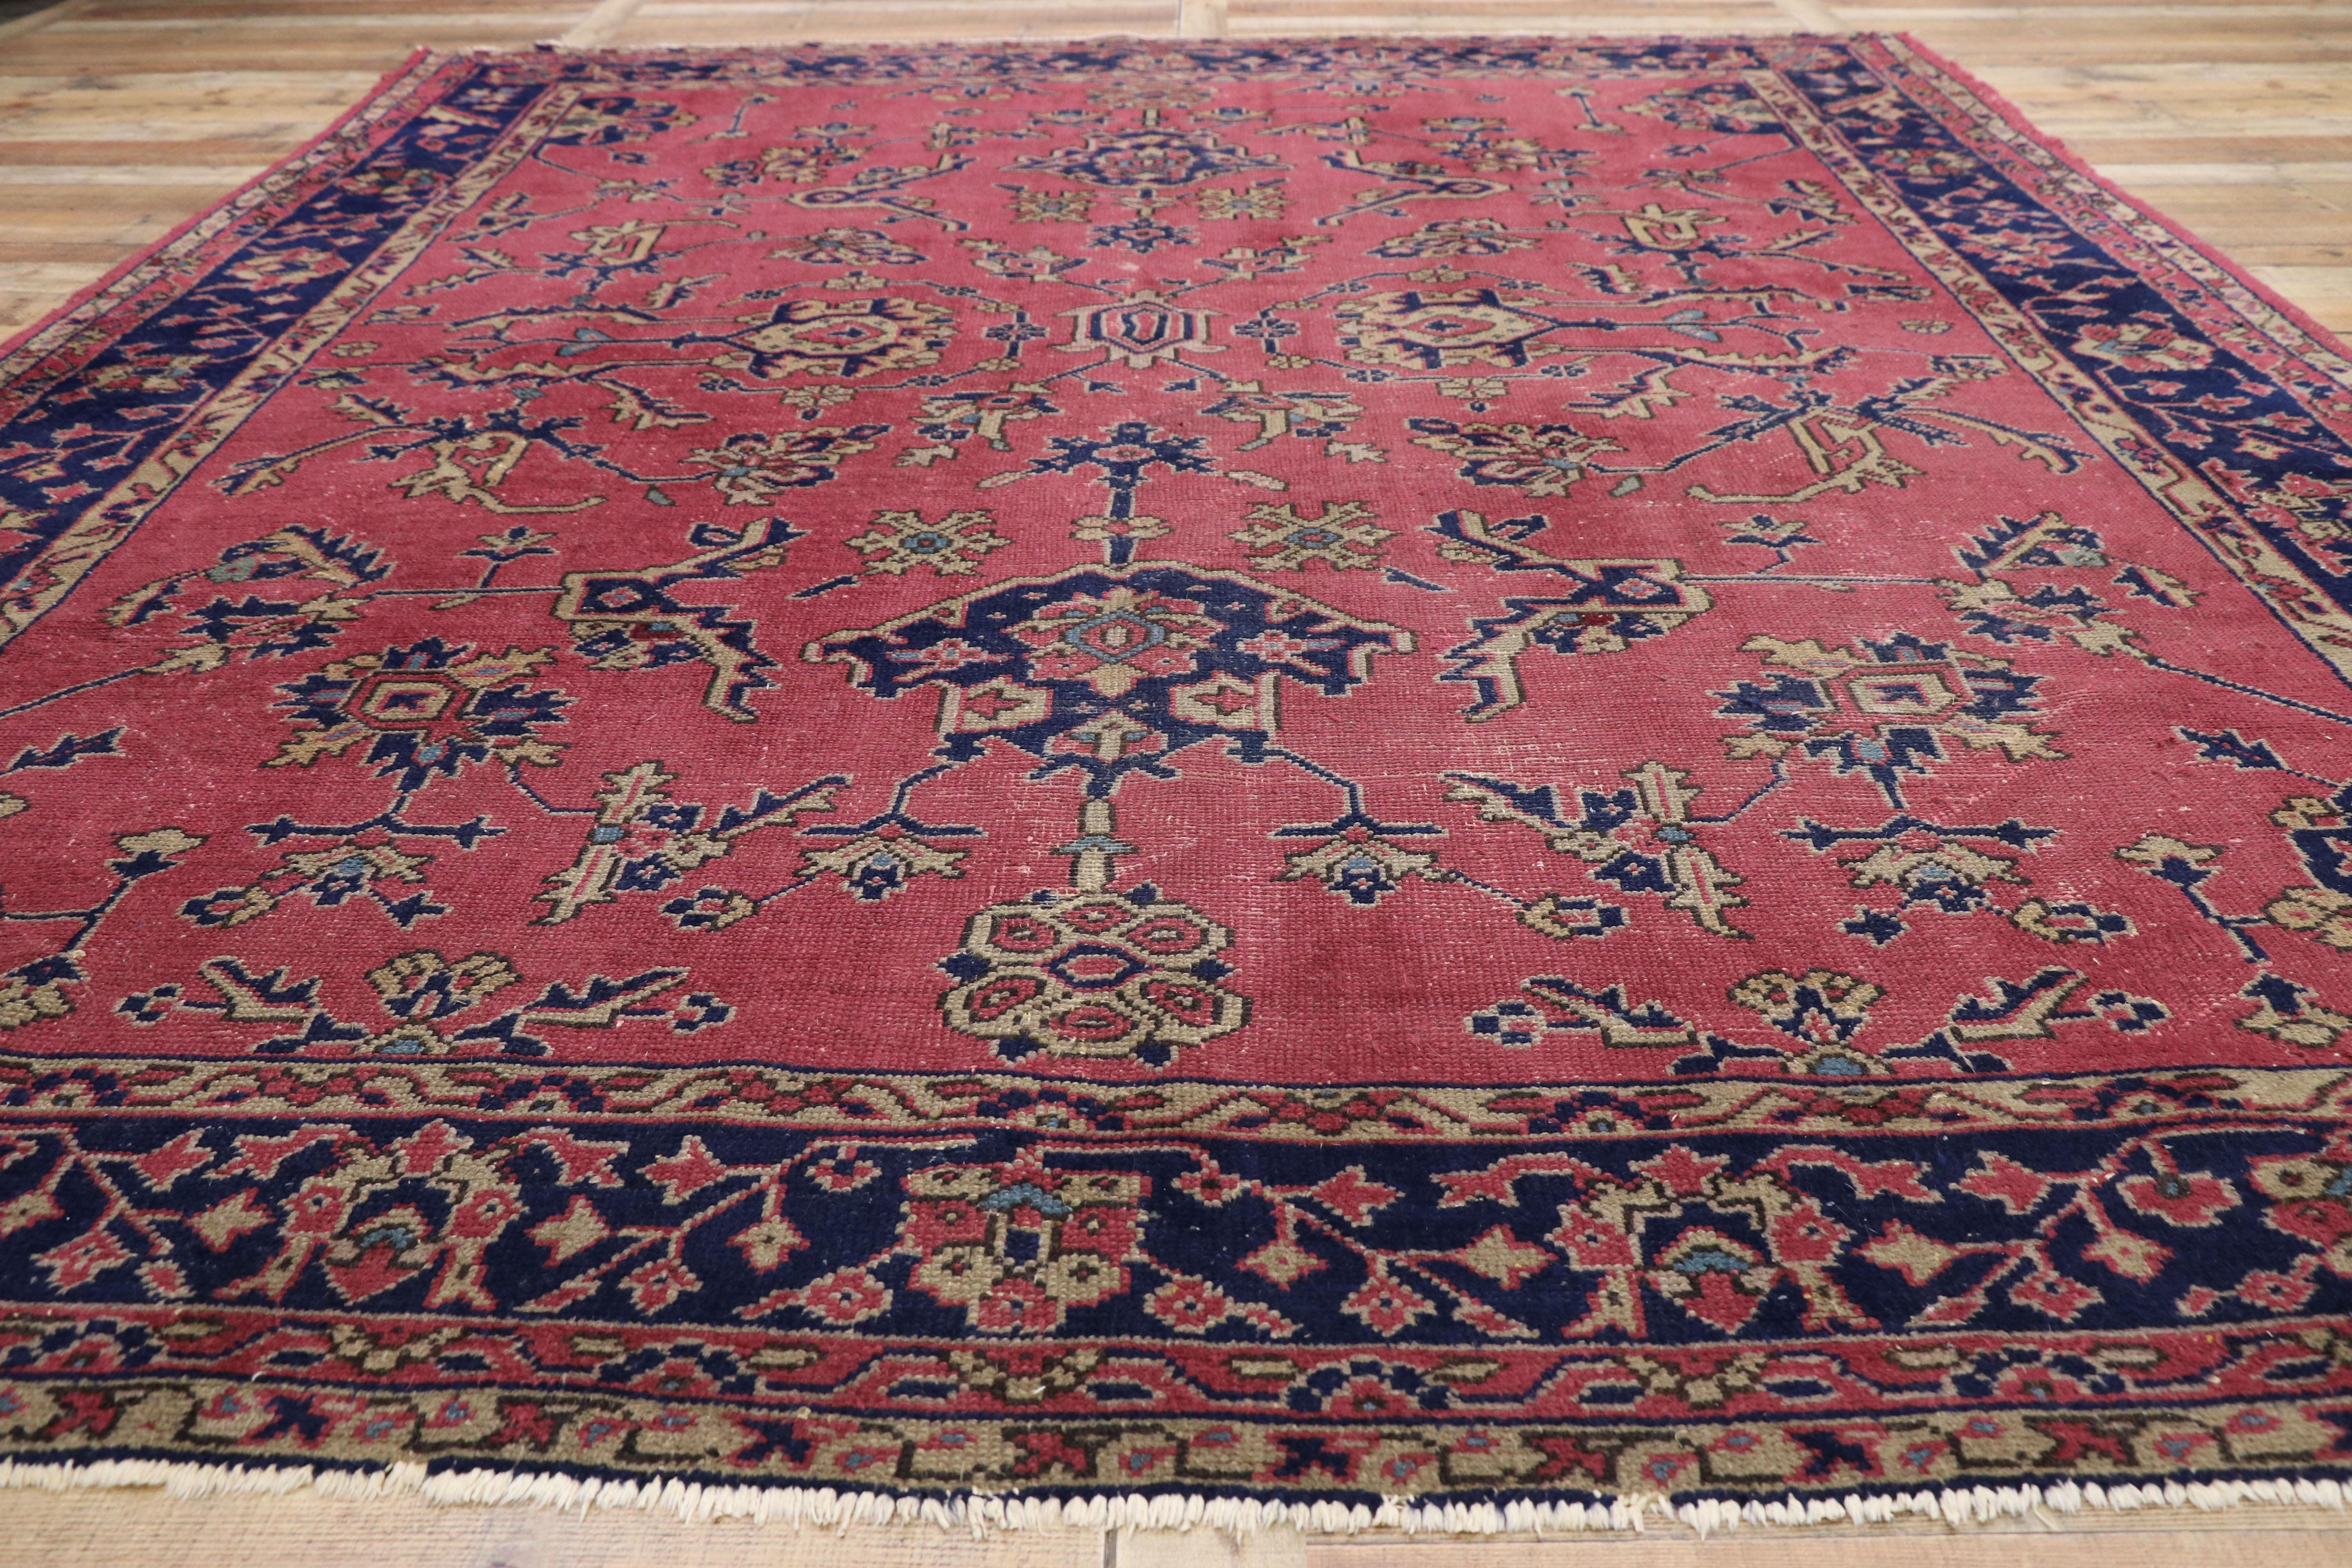 Distressed Antique Turkish Sparta Rug with Industrial Romantic Venetian Style 1